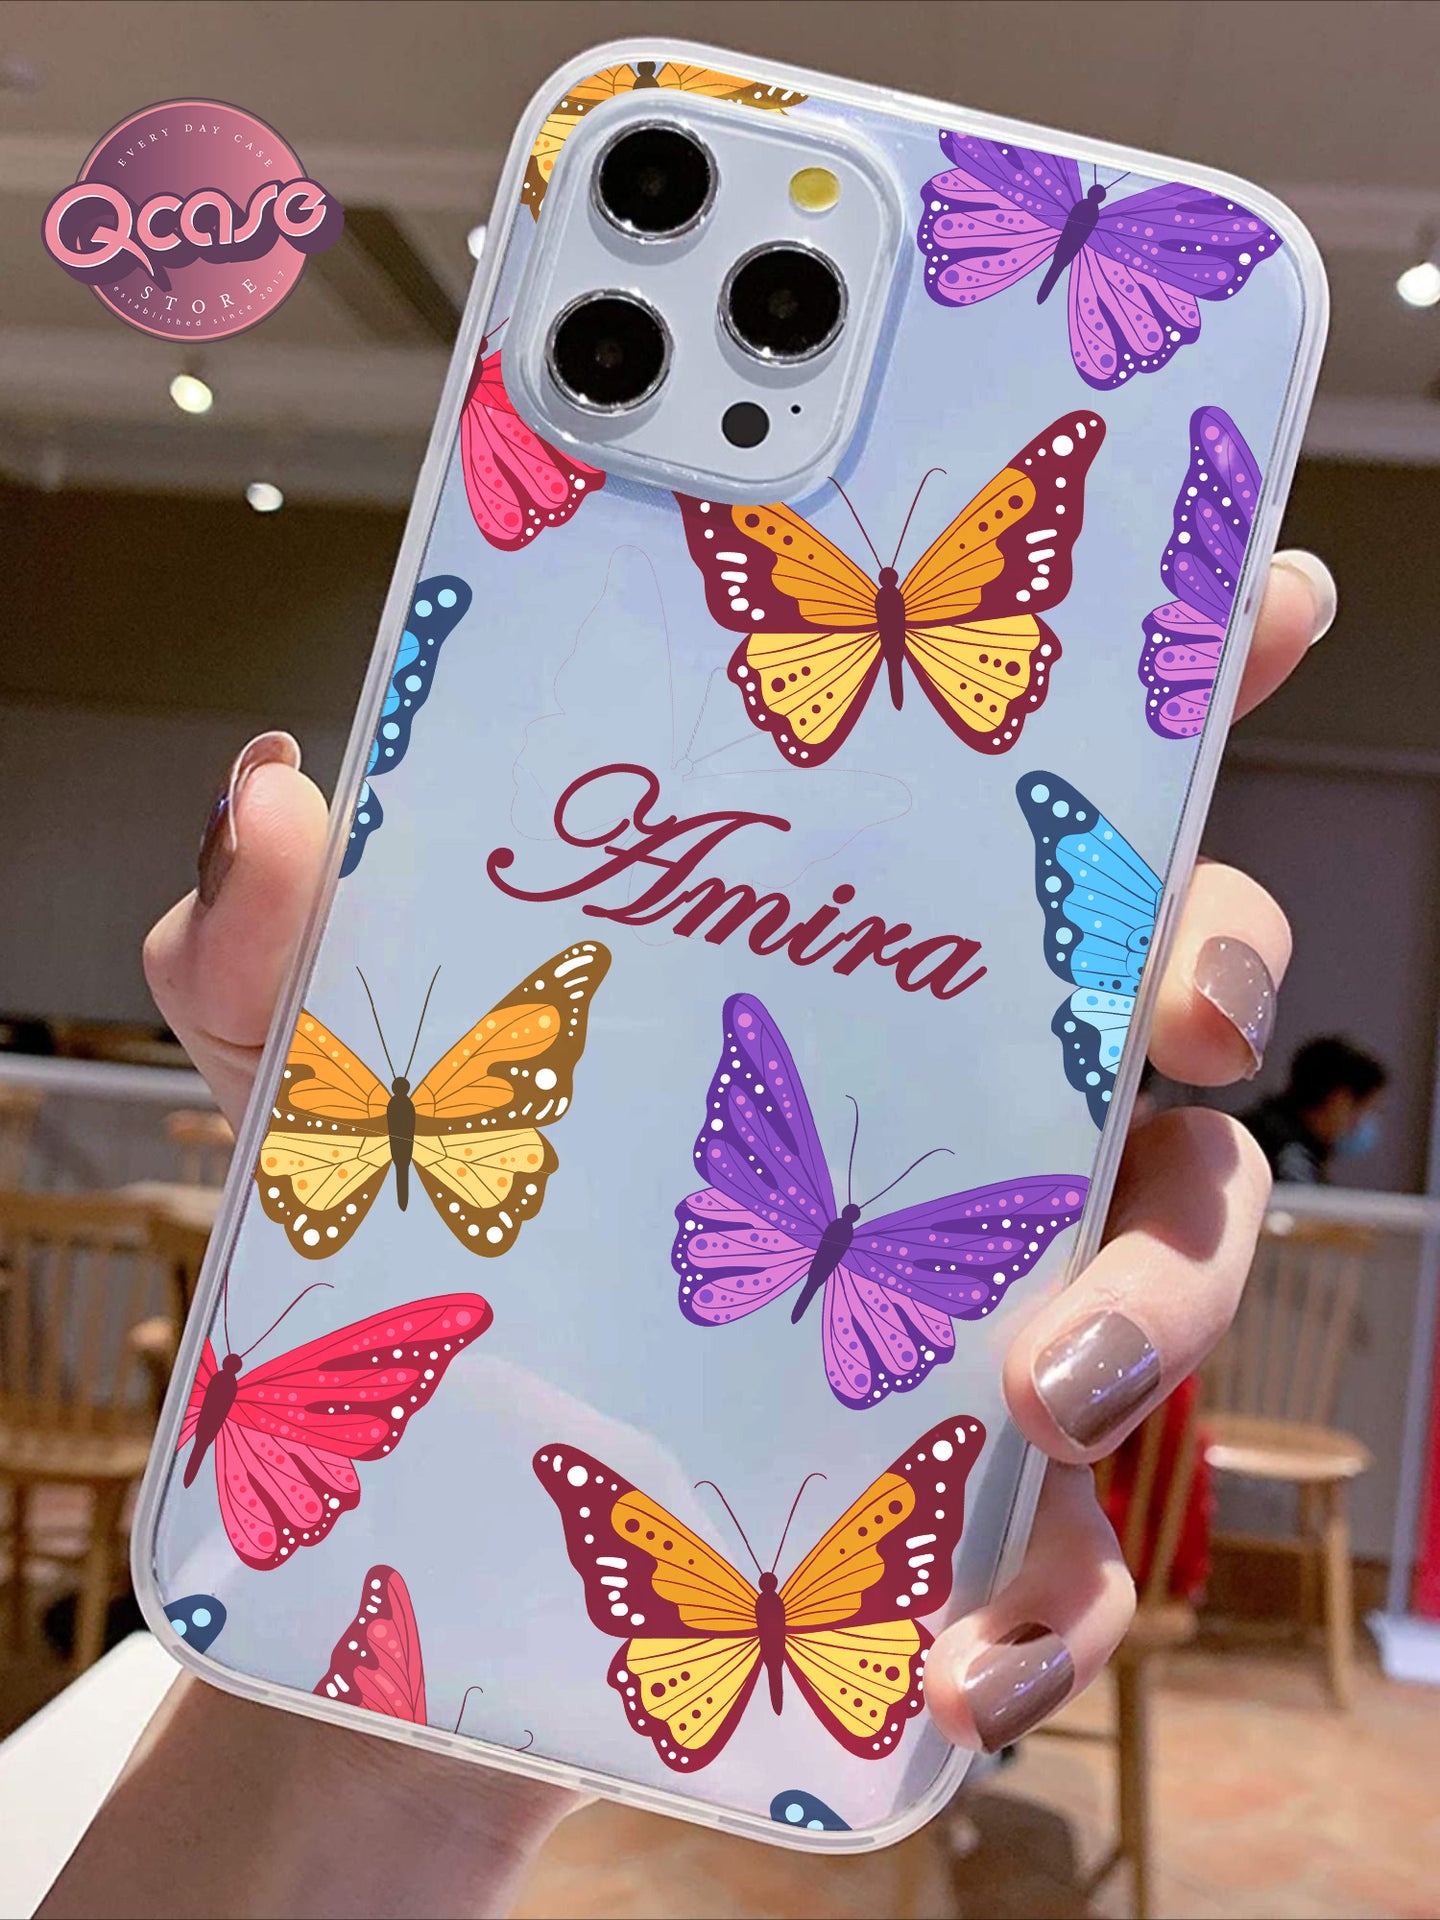 Design and name phone cover